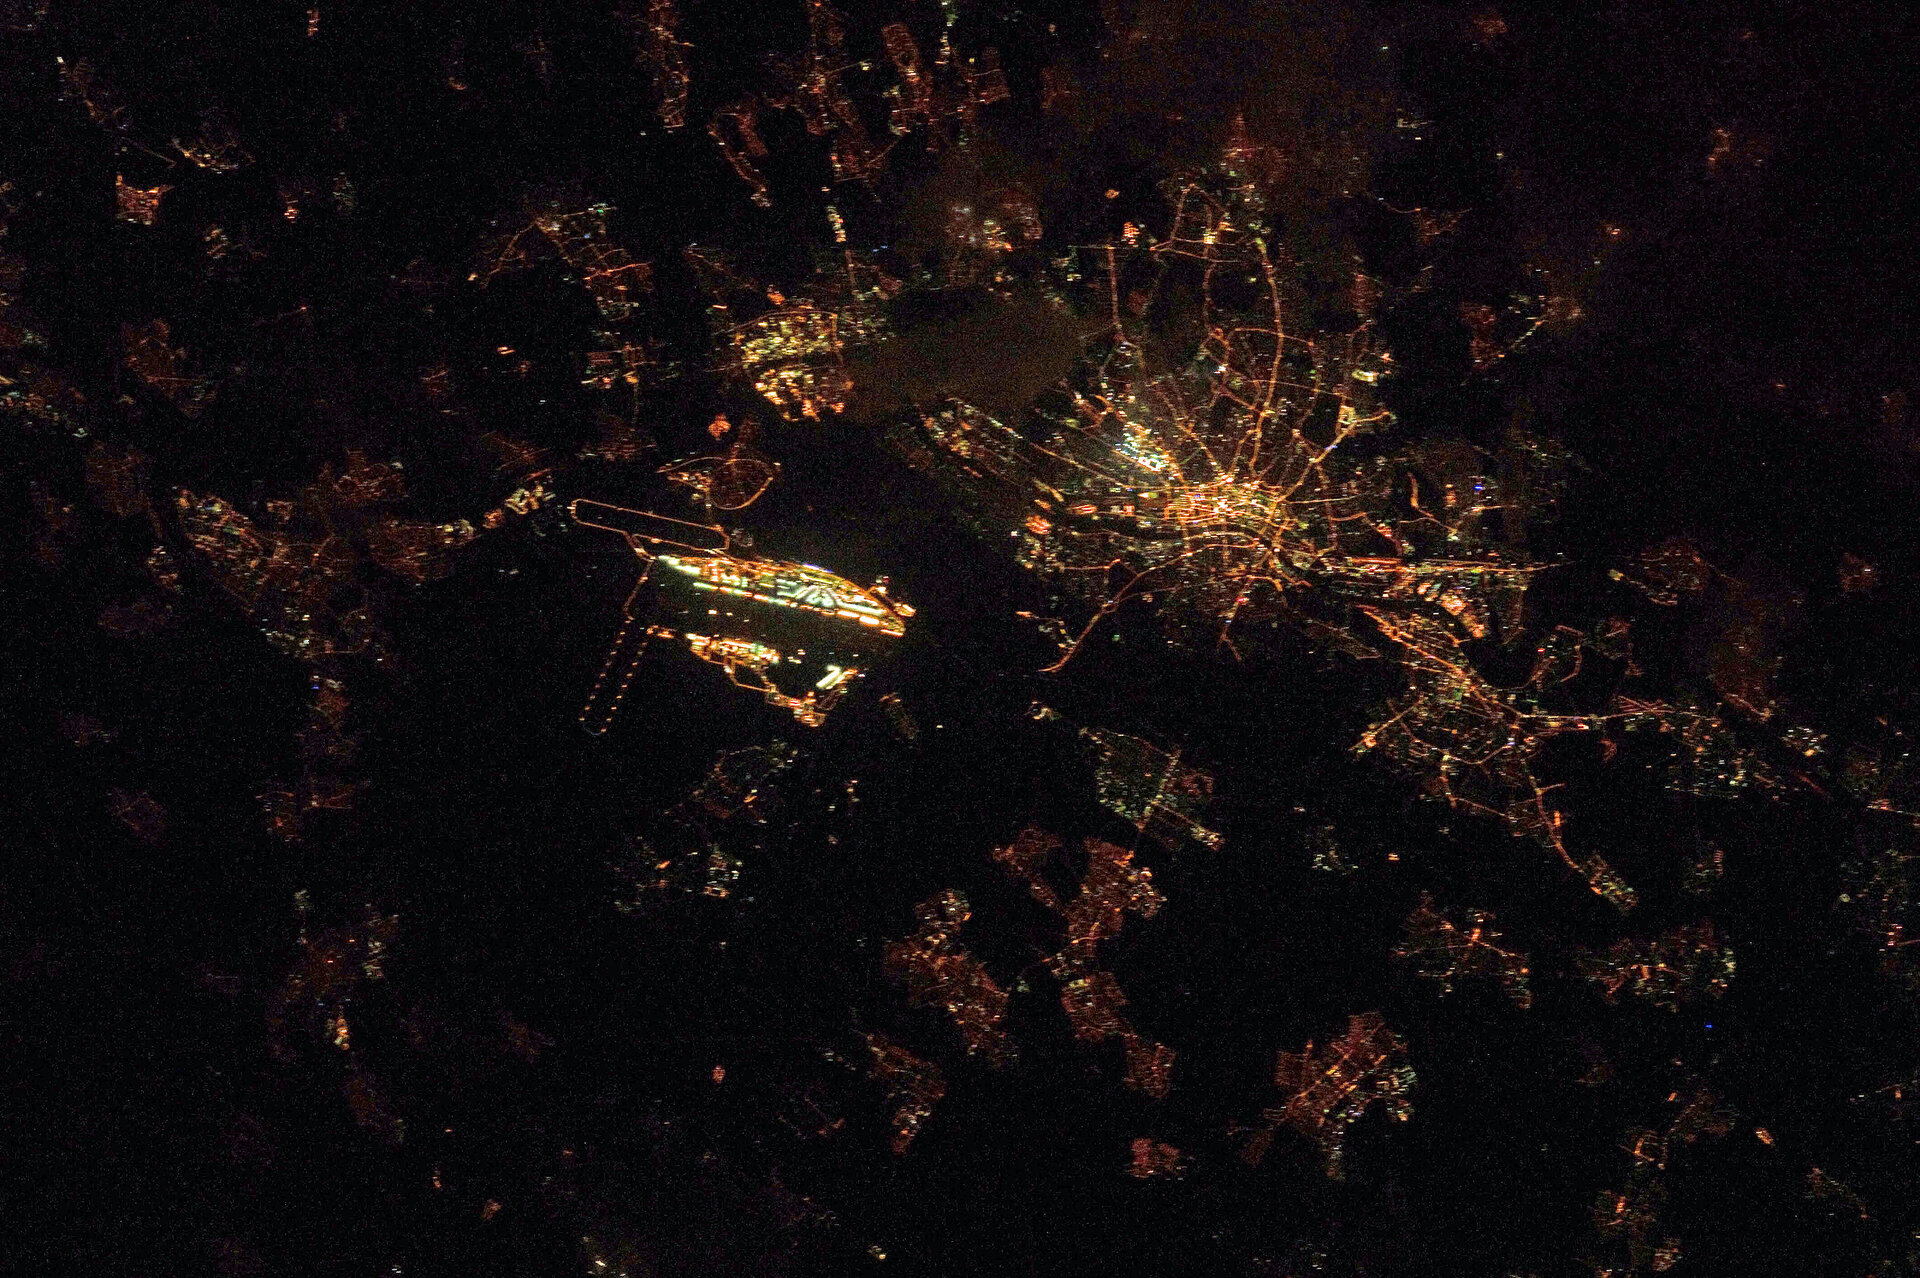 Frankfurt, as seen from the ISS